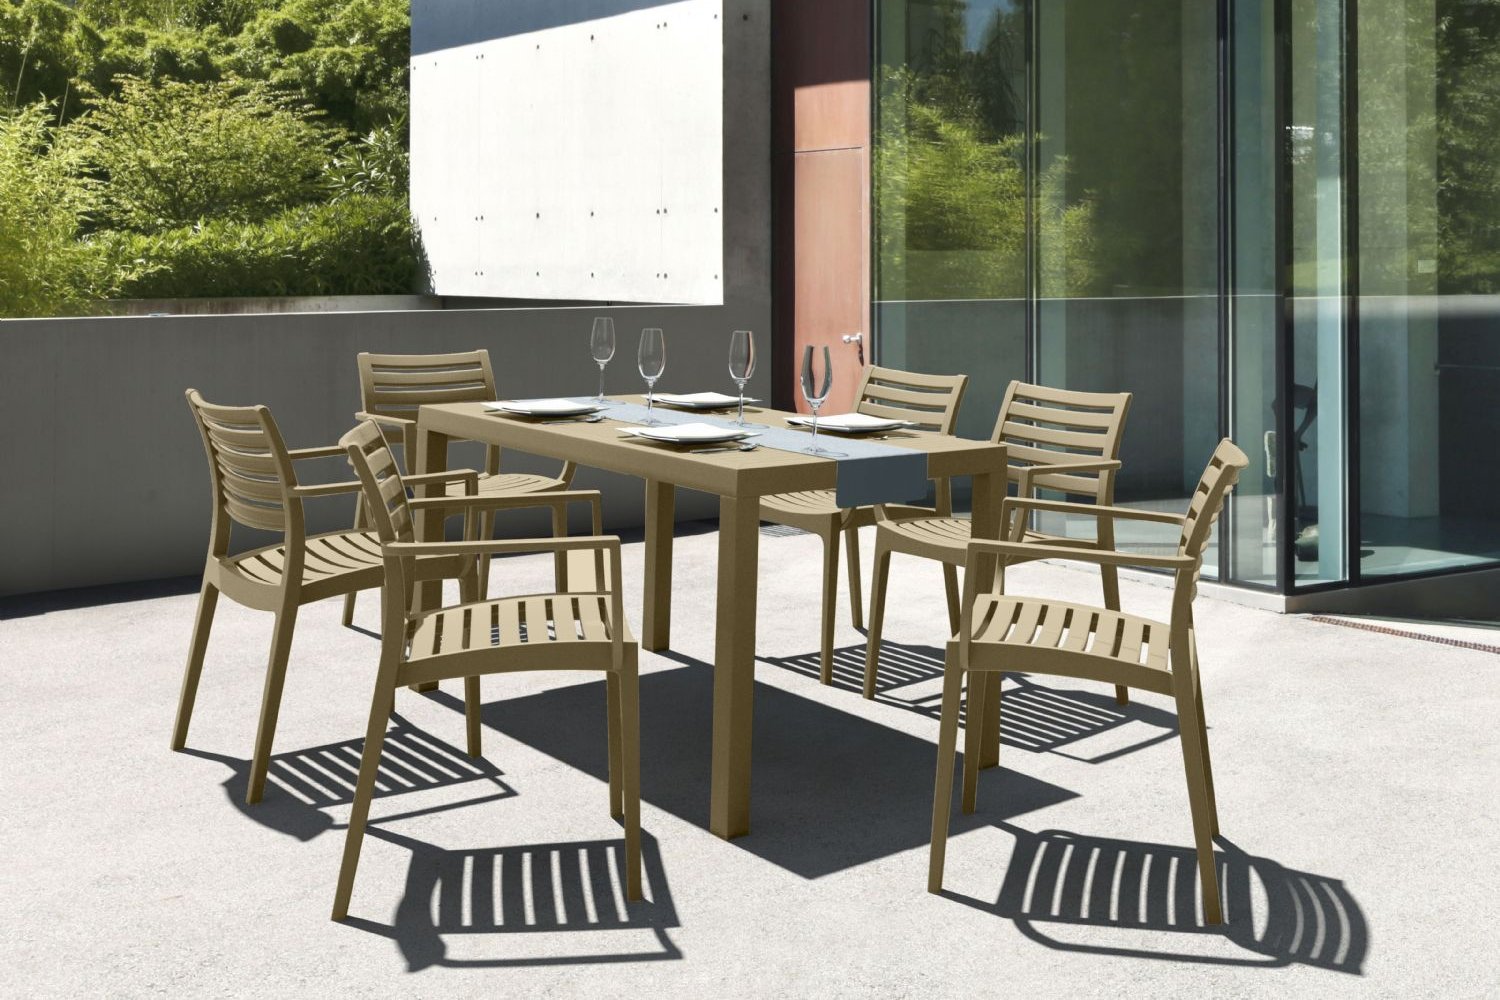 Artemis Resin Rectangle Outdoor Dining Set 7 Piece with Arm Chairs Taupe ISP1862S-DVR - 6